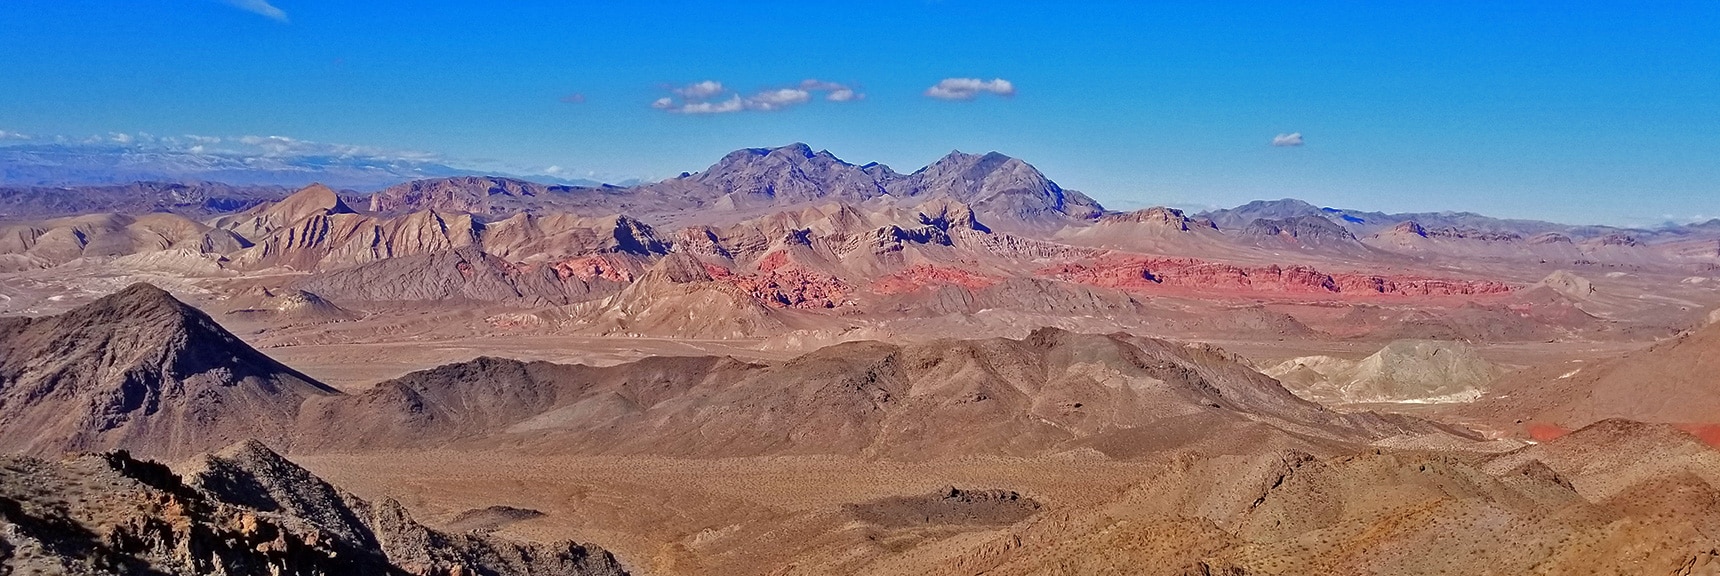 Bowl of Fire and Muddy Mts. From Hamblin Mt. Summit | Hamblin Mountain, Lake Mead National Conservation Area, Nevada